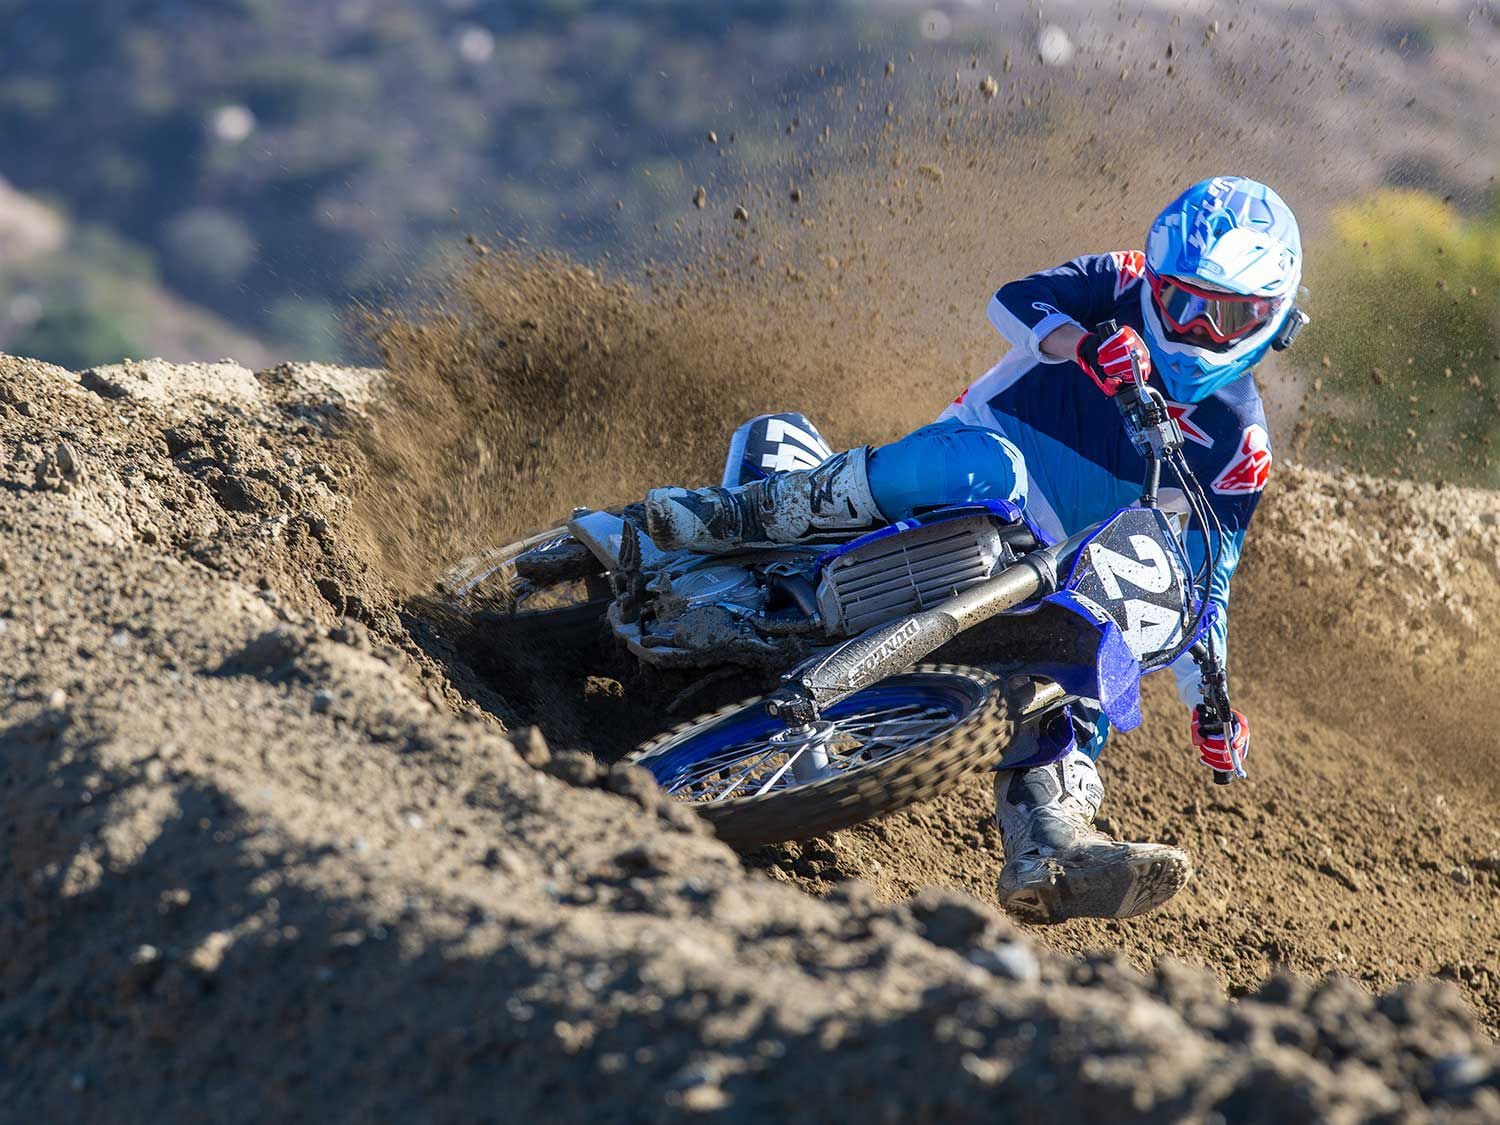 “The YZ250F’s low-end power and torque feel throughout the rpm range are unmatched, and with the updates made to the cylinder head and intake for 2021, it is comparable to most of the other bikes in the upper part of the rpm range.” <em>—Andrew Oldar</em>